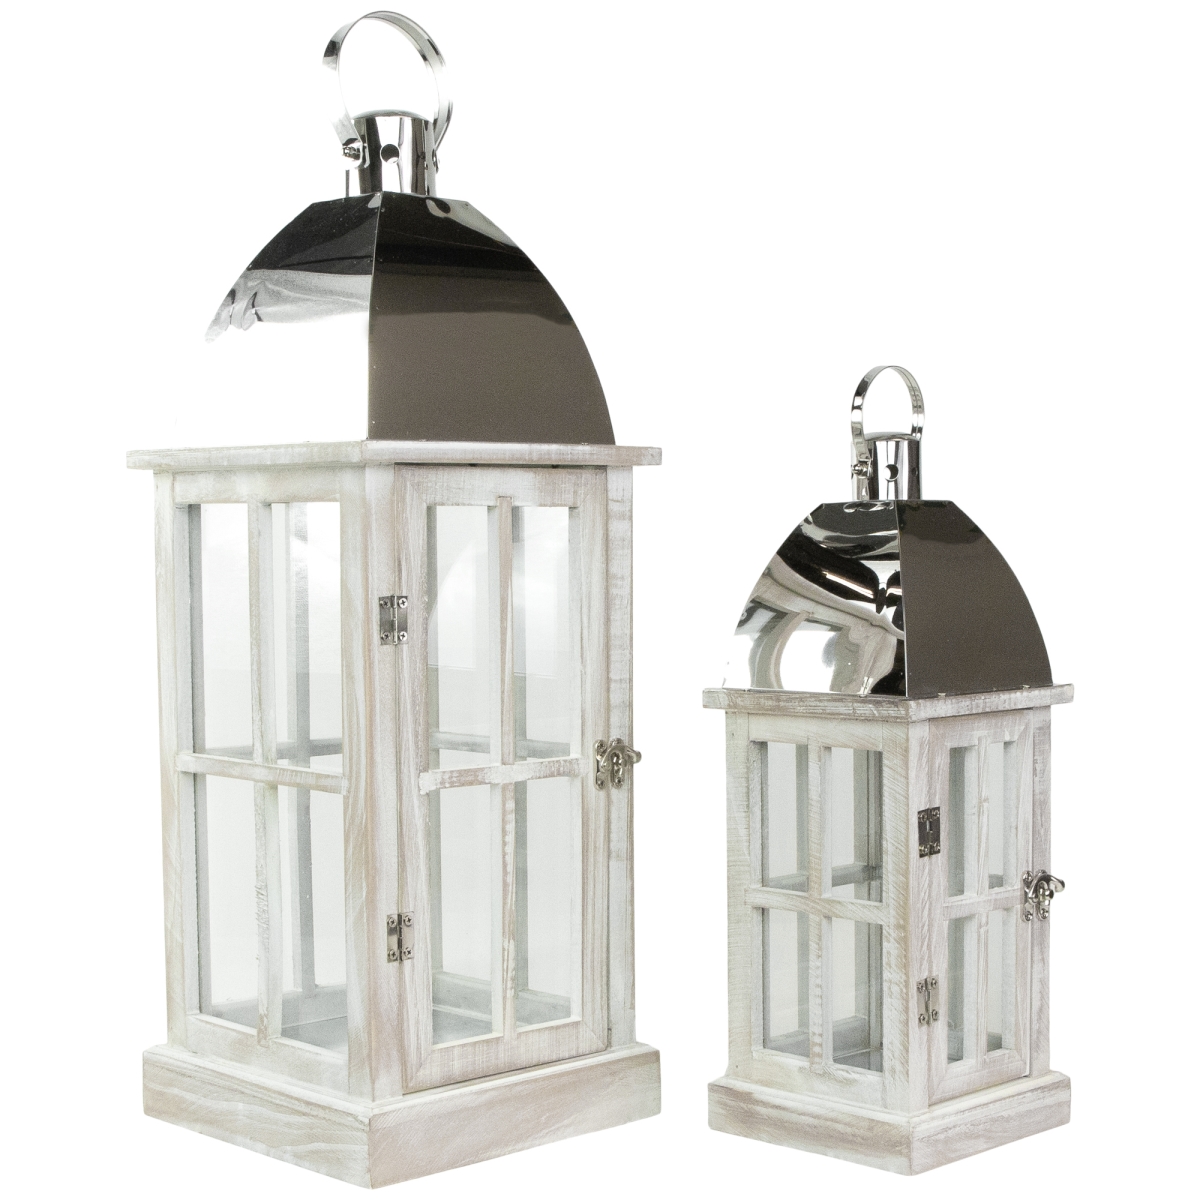 Picture of Northlight 35132876 21.5 in. Antique White Wood Candle Lanterns with Silver Tops, Set of 2